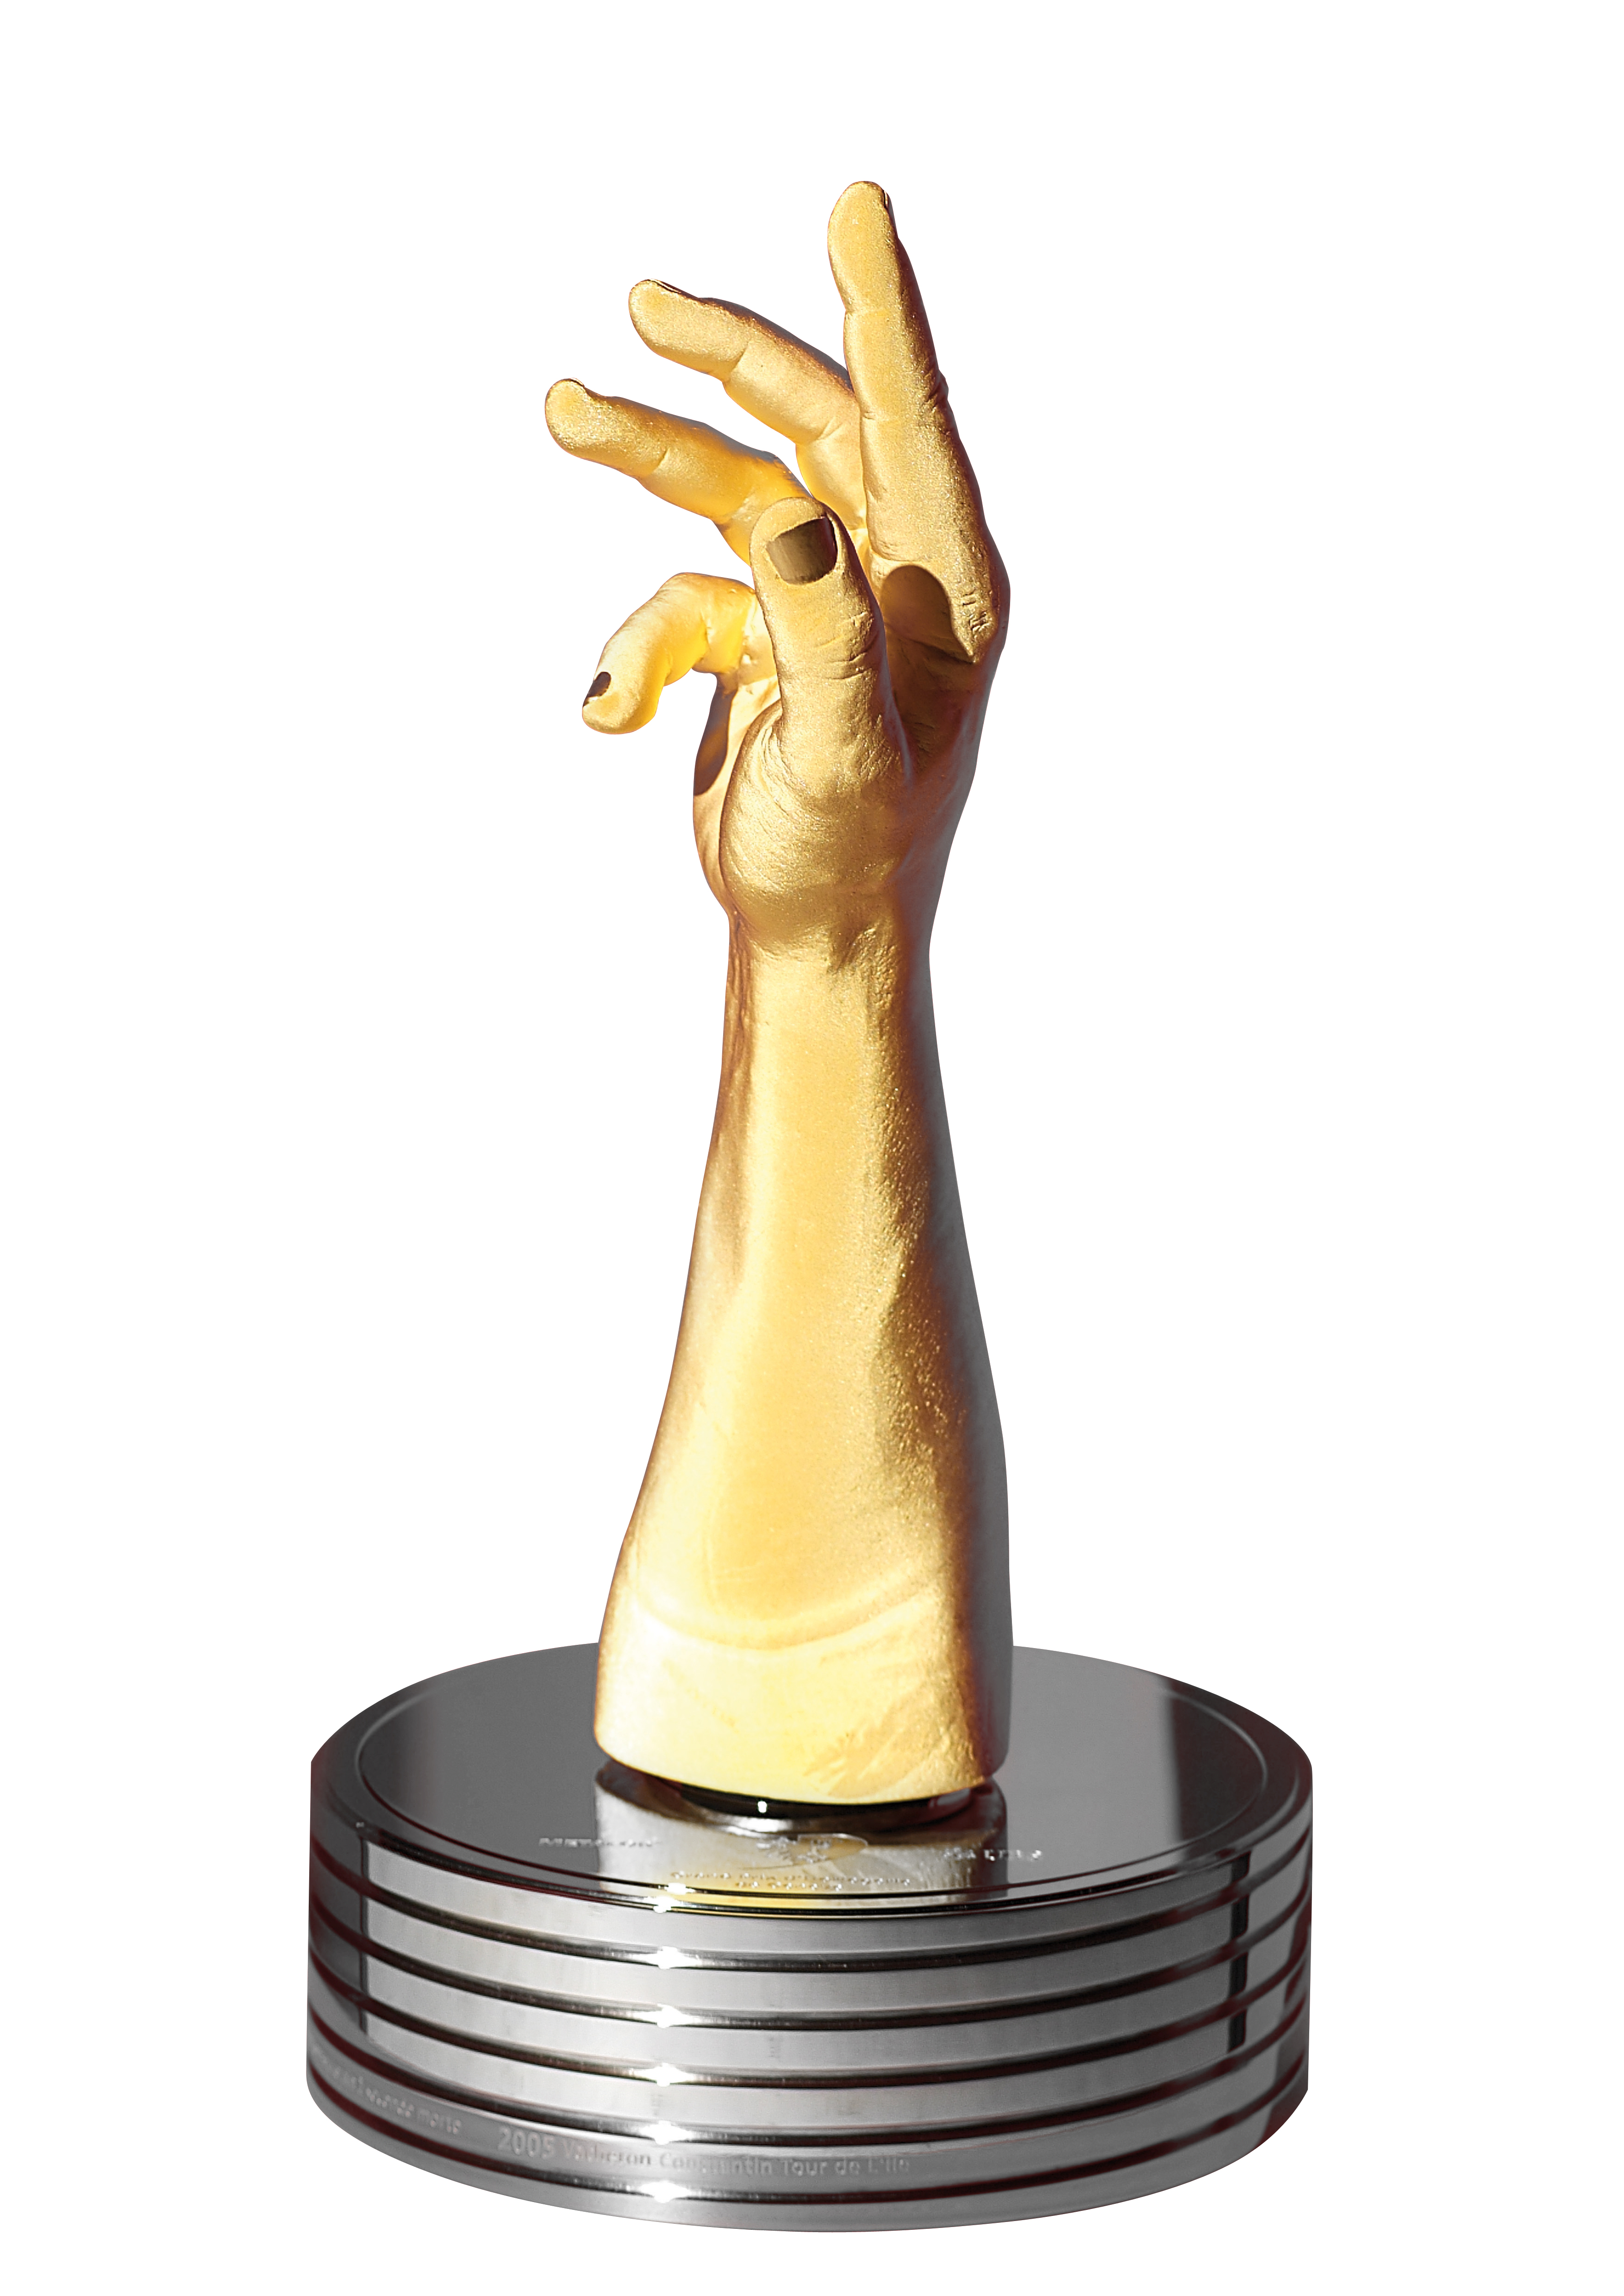 Winners of each of the 15 GPHG categories will receive a Golden hand statuette inspired by Michelangelo’s Sistine Chapel fresco ‘The Creation of Adam’.